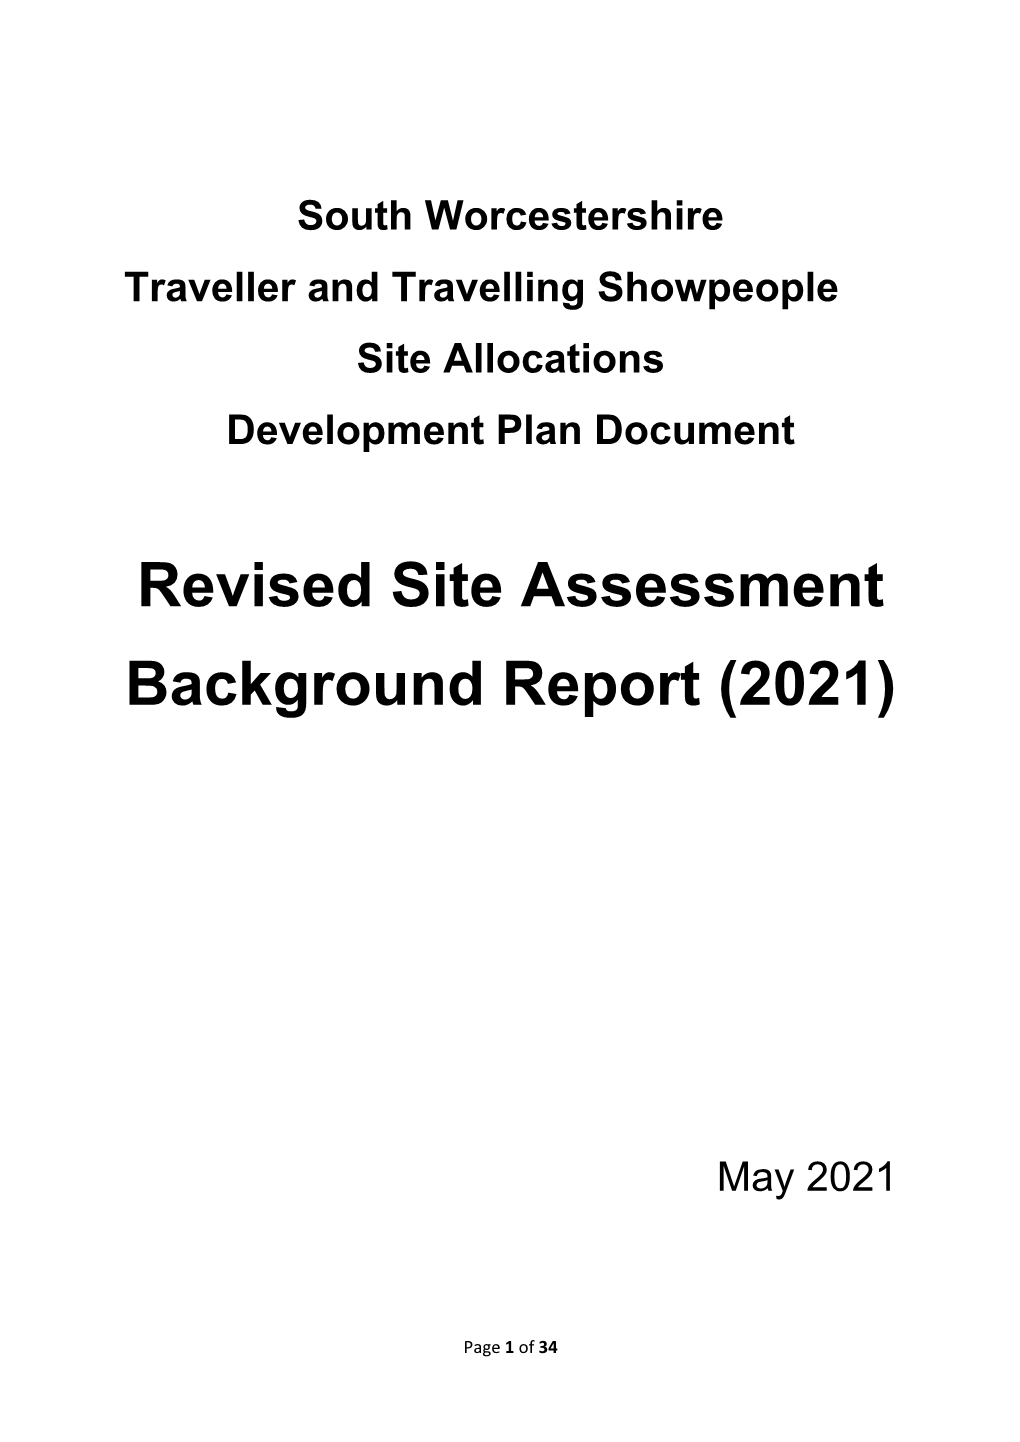 South Worcestershire Development Plan (SWDP) and Good Practice on Designing Gypsy and Traveller Sites